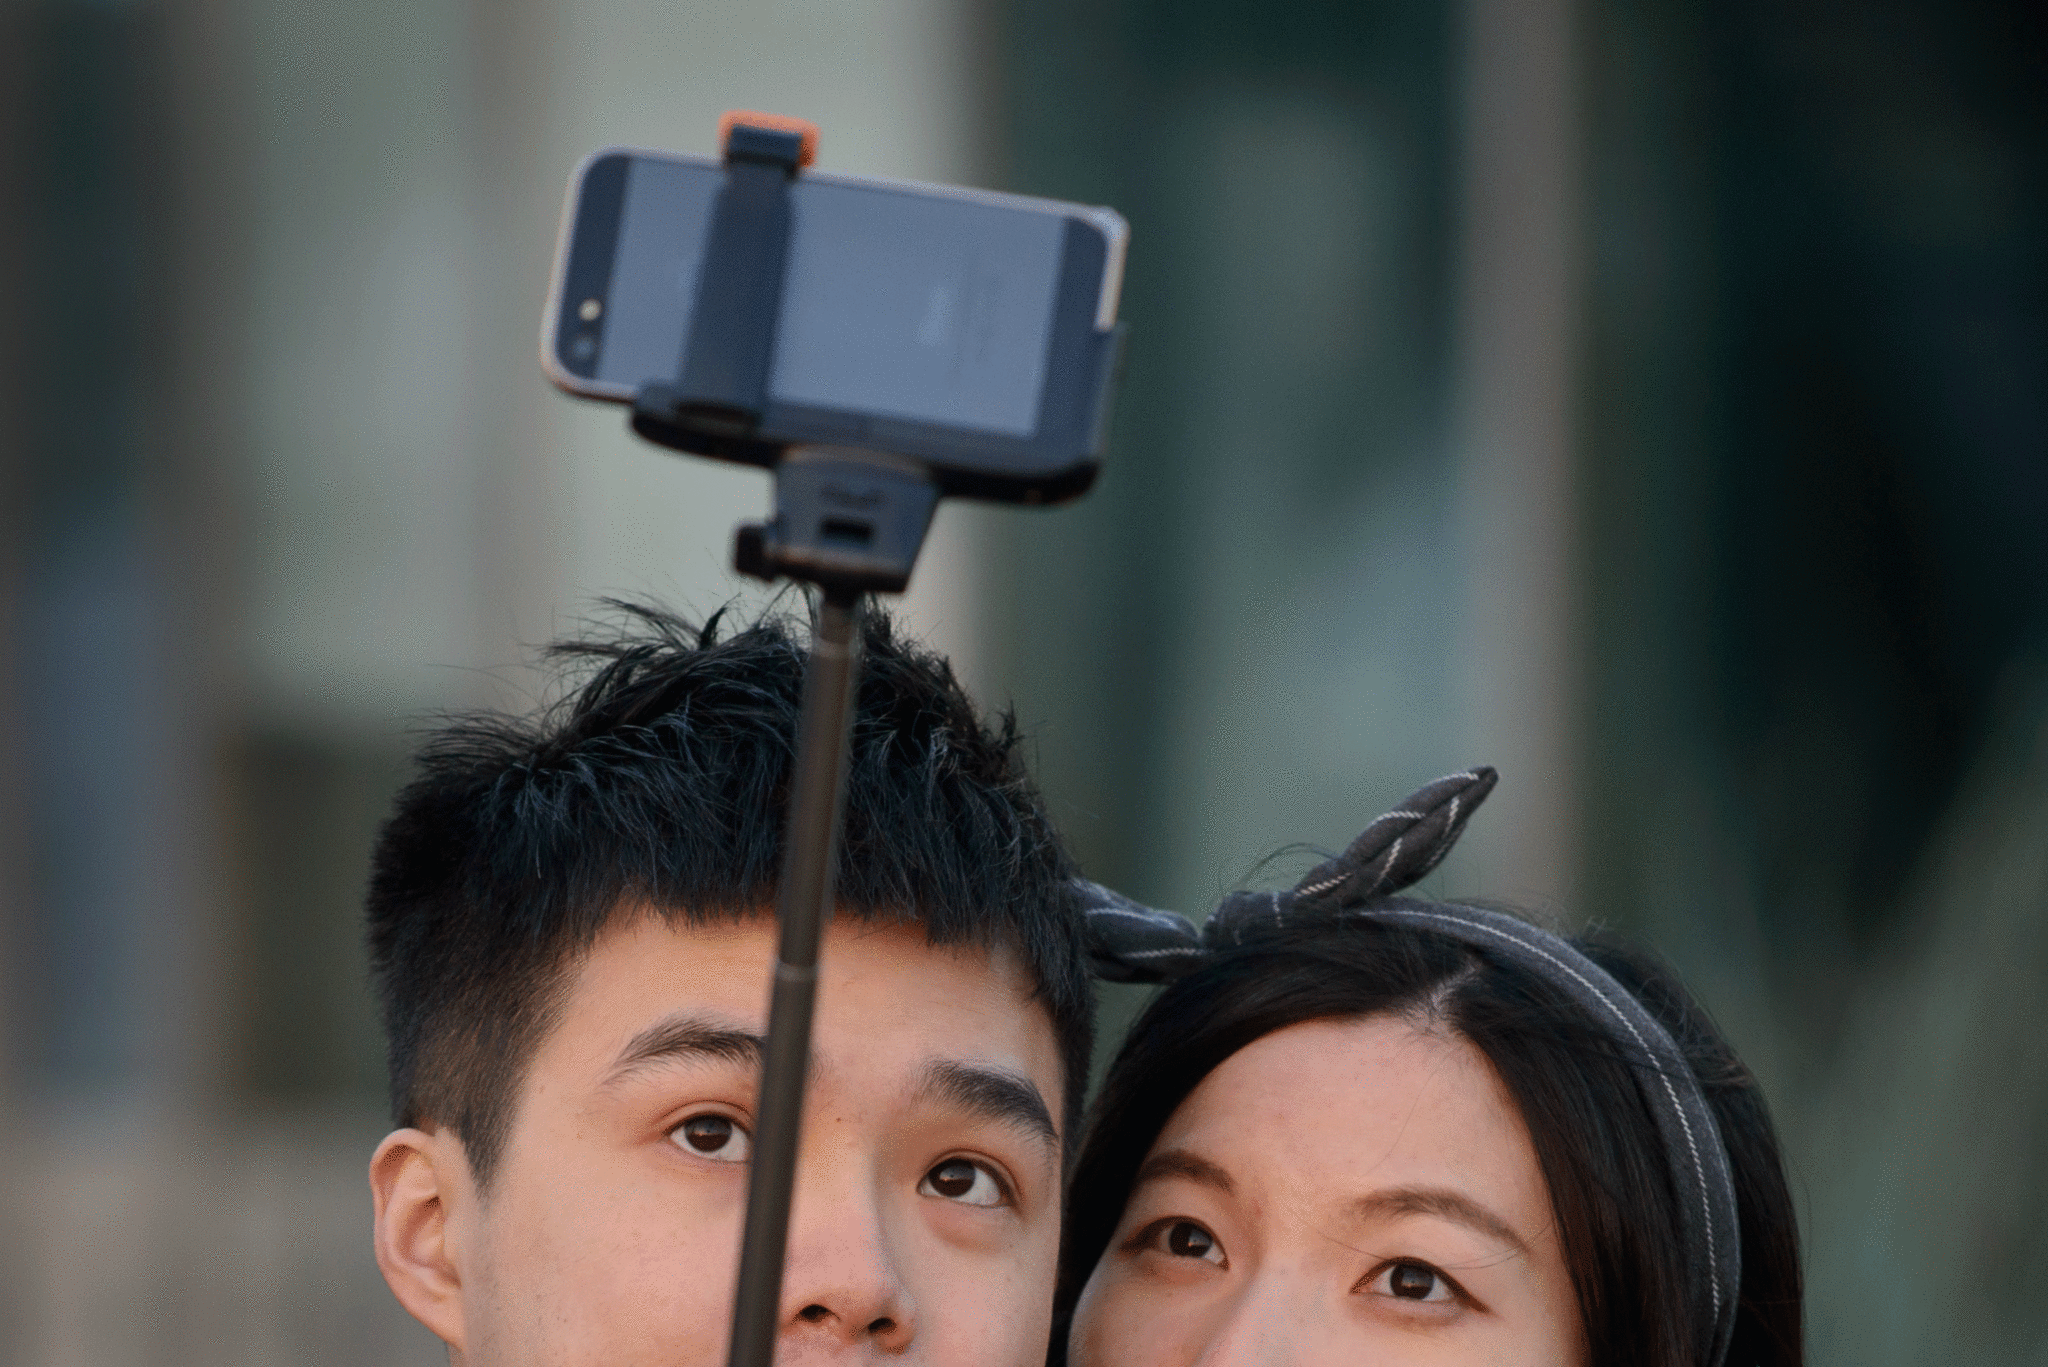 From Tuesday, tourists will not be allowed to use selfie sticks at Walt Disney World in Orlando, Florida, or Disneyland in Anaheim, California.